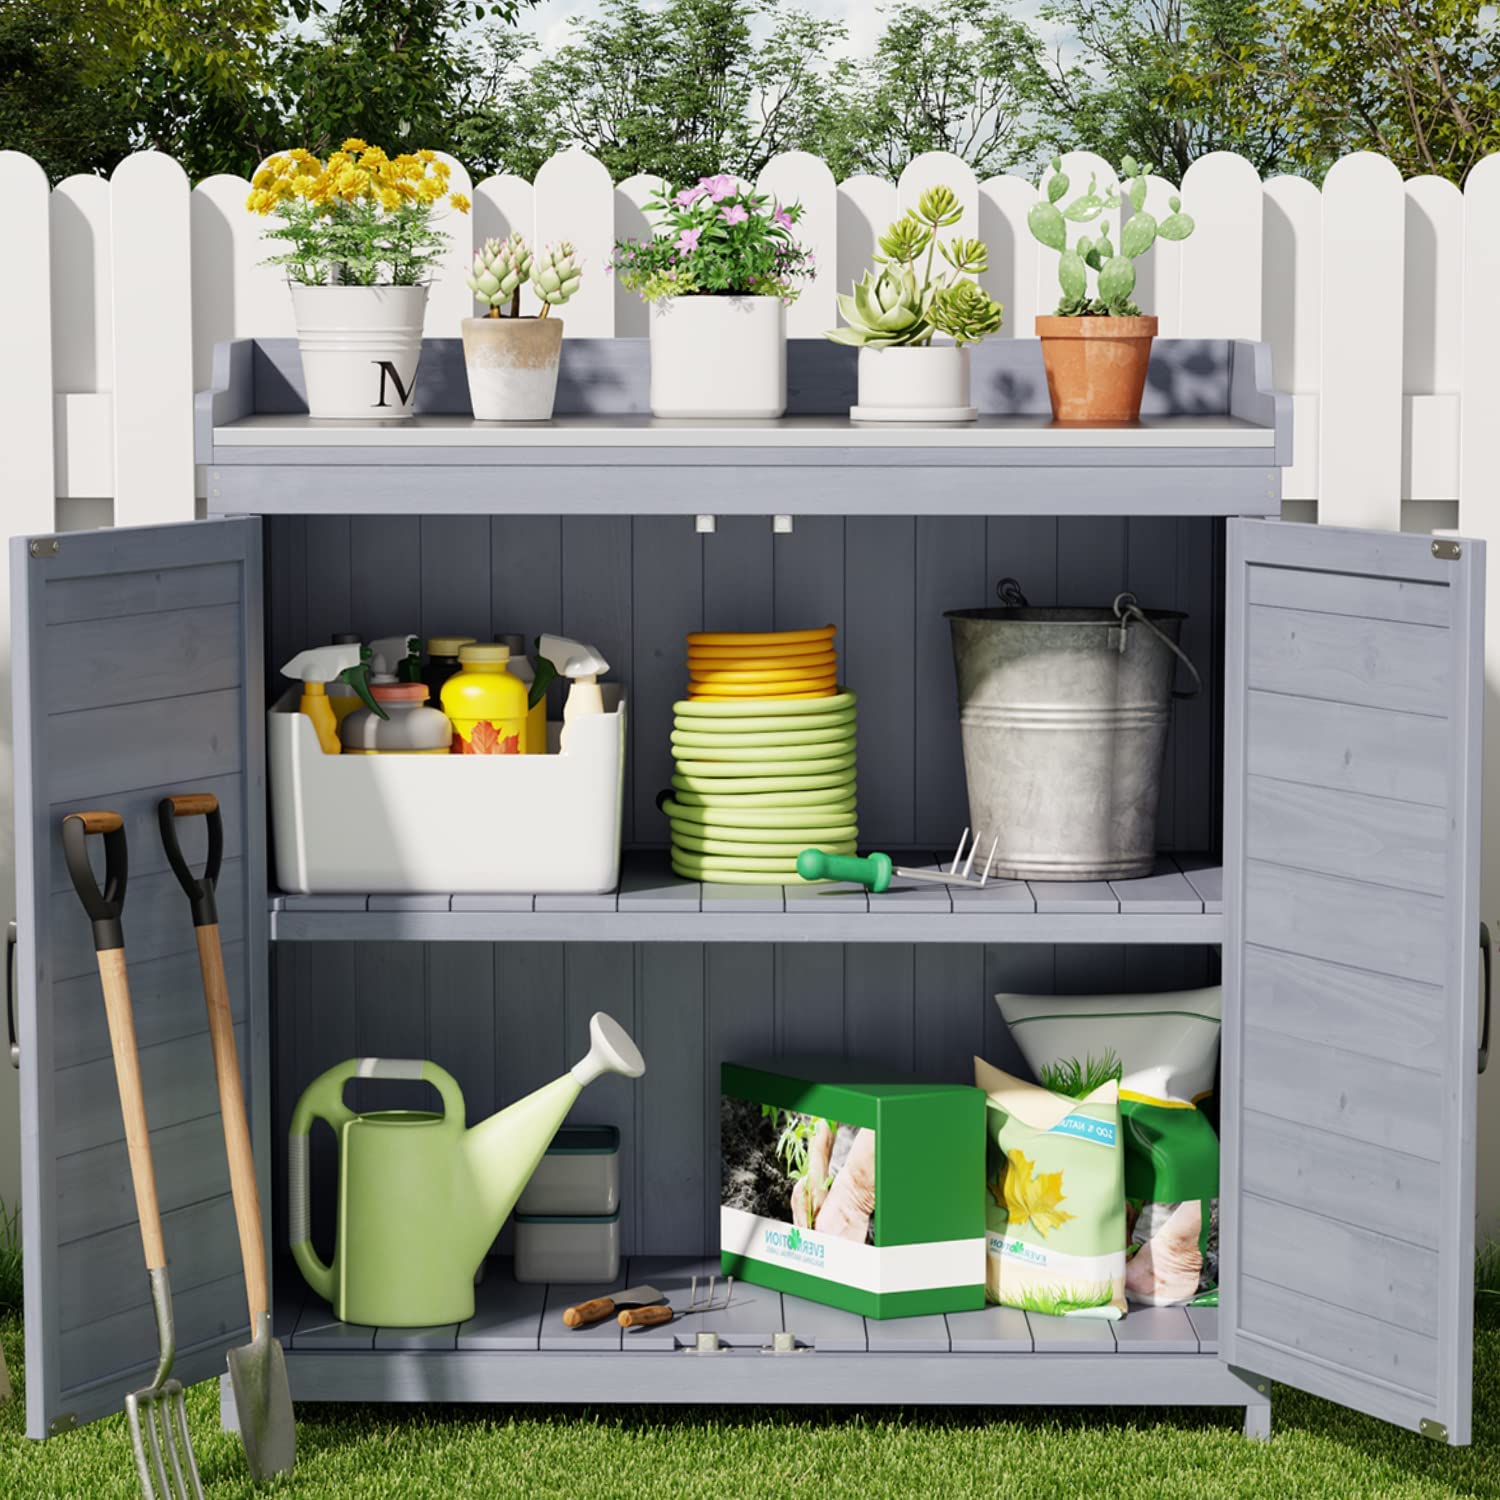 Lofka Outdoor Garden Patio Wooden Storage Cabinet with Potting Benches, Gray - image 2 of 8